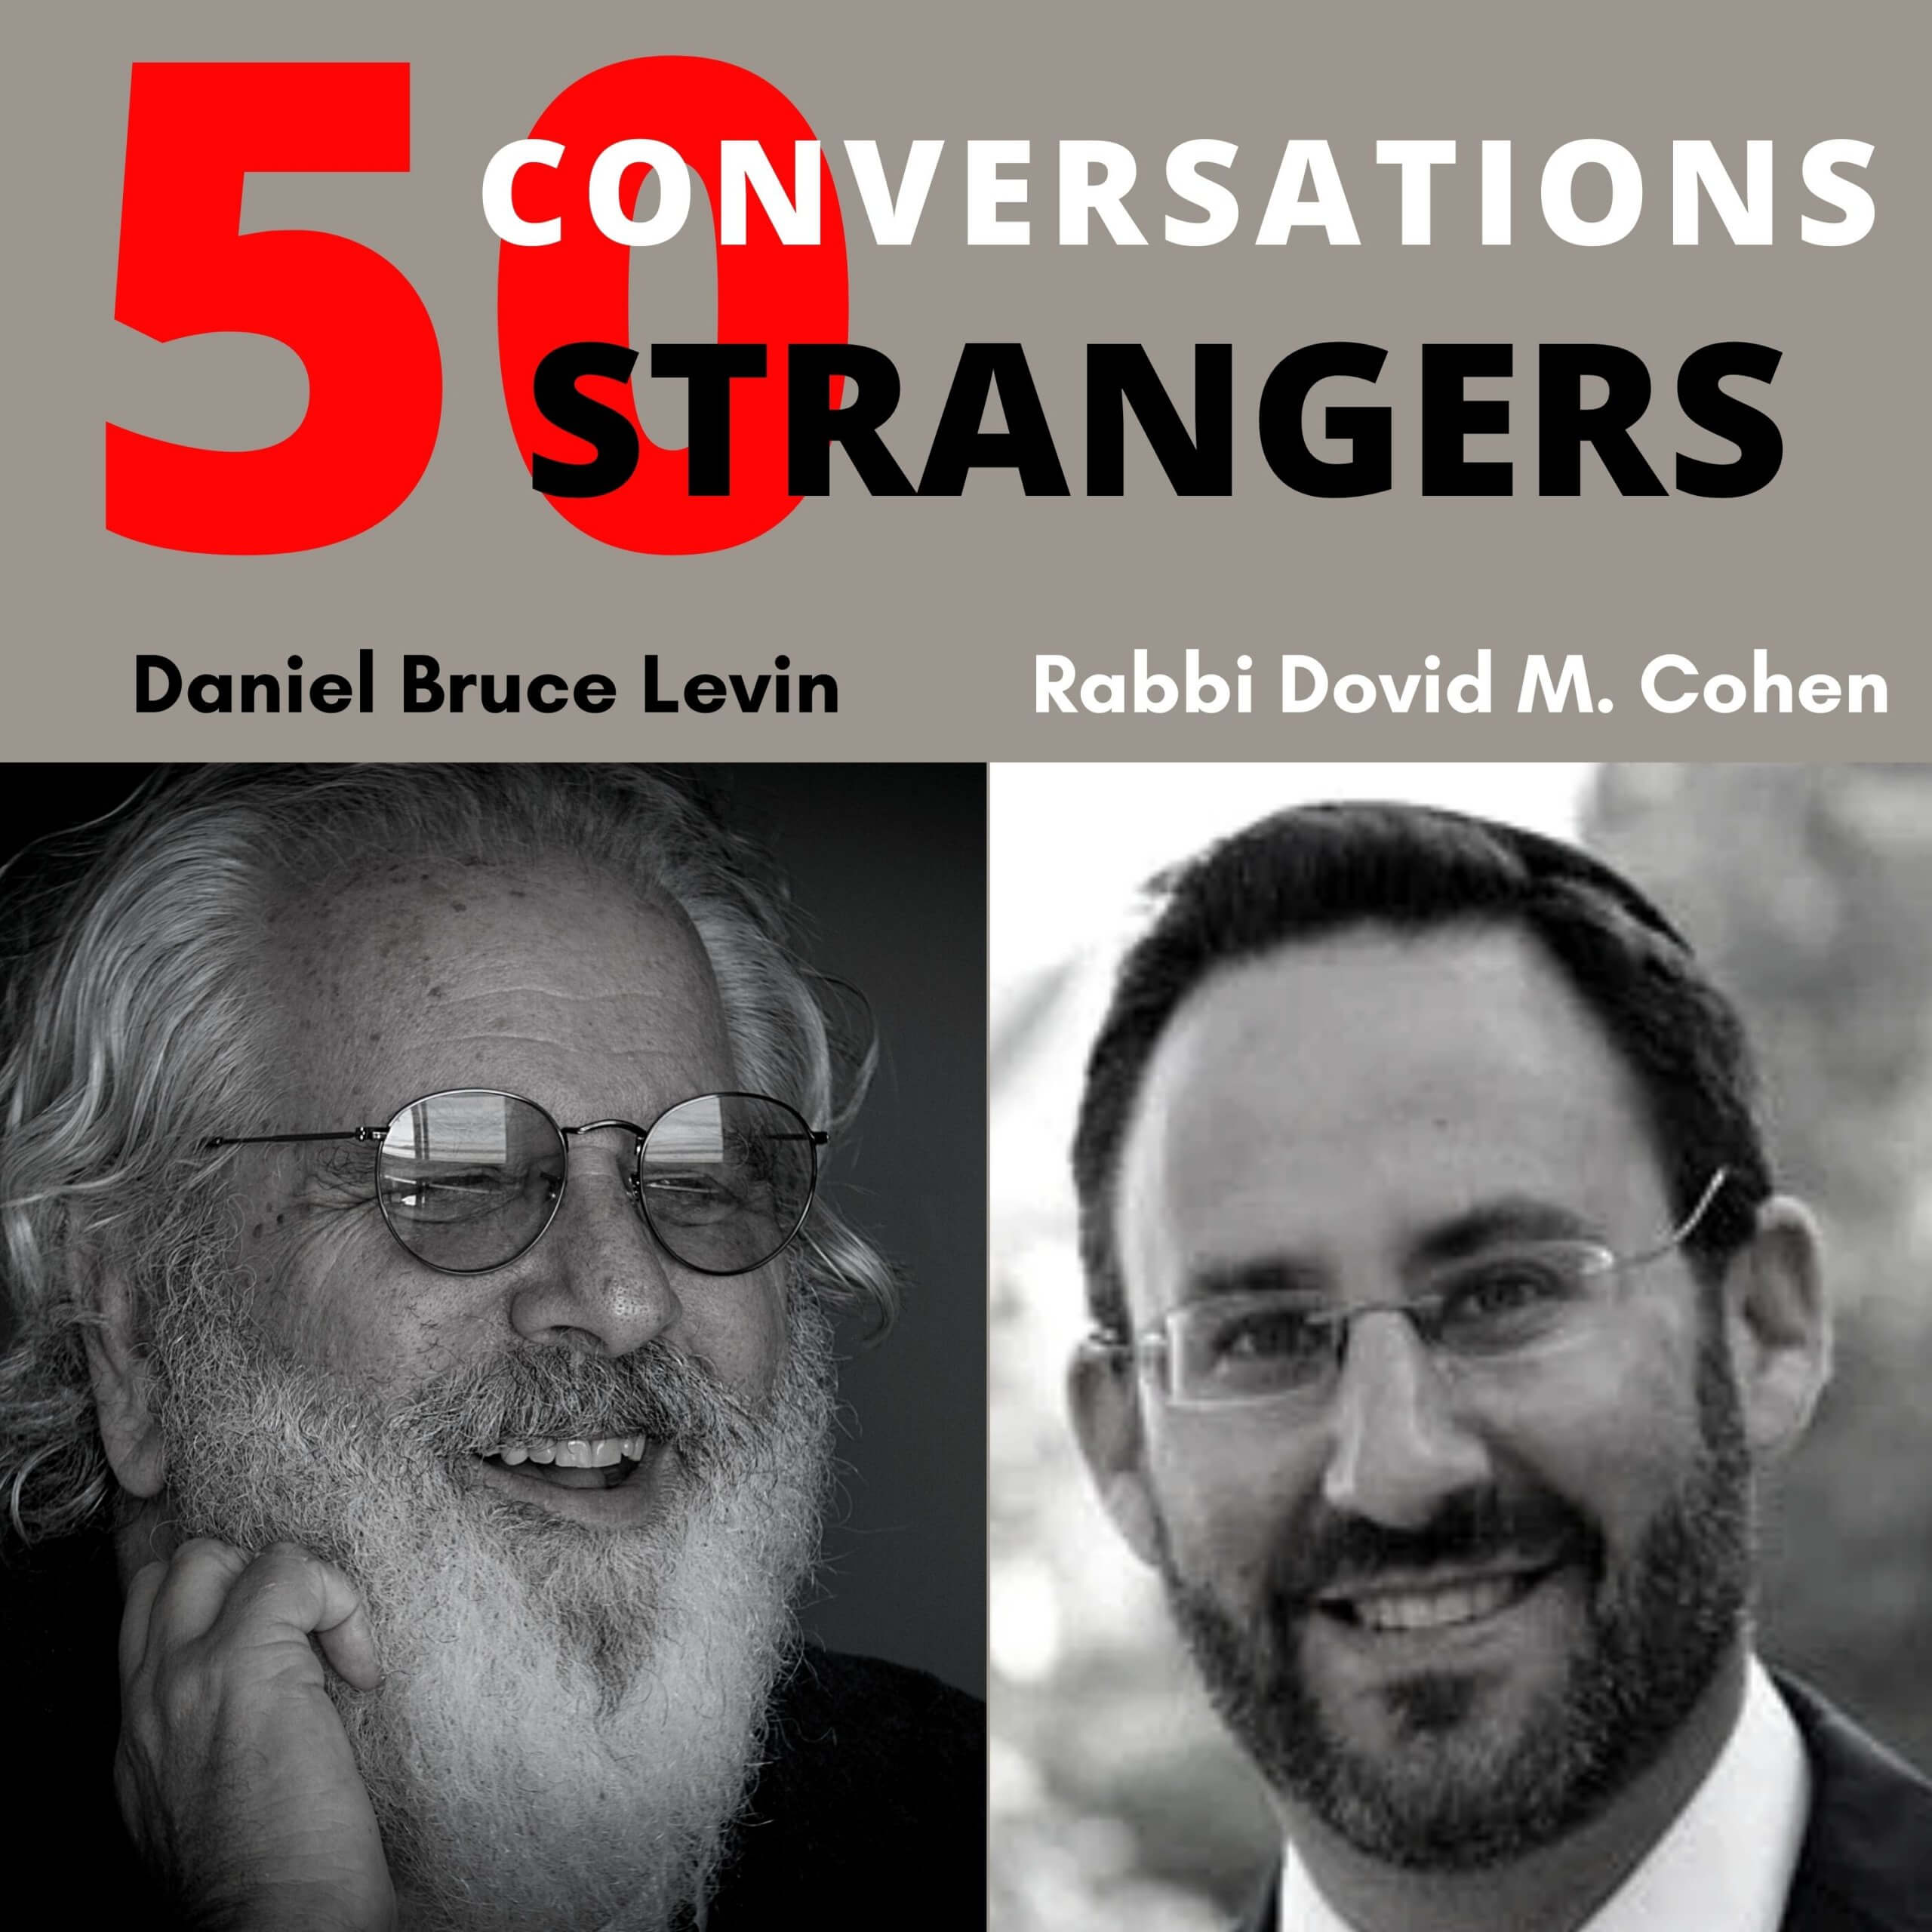 50 Conversations with 50 Strangers with Rabbi Dovid M. Cohen